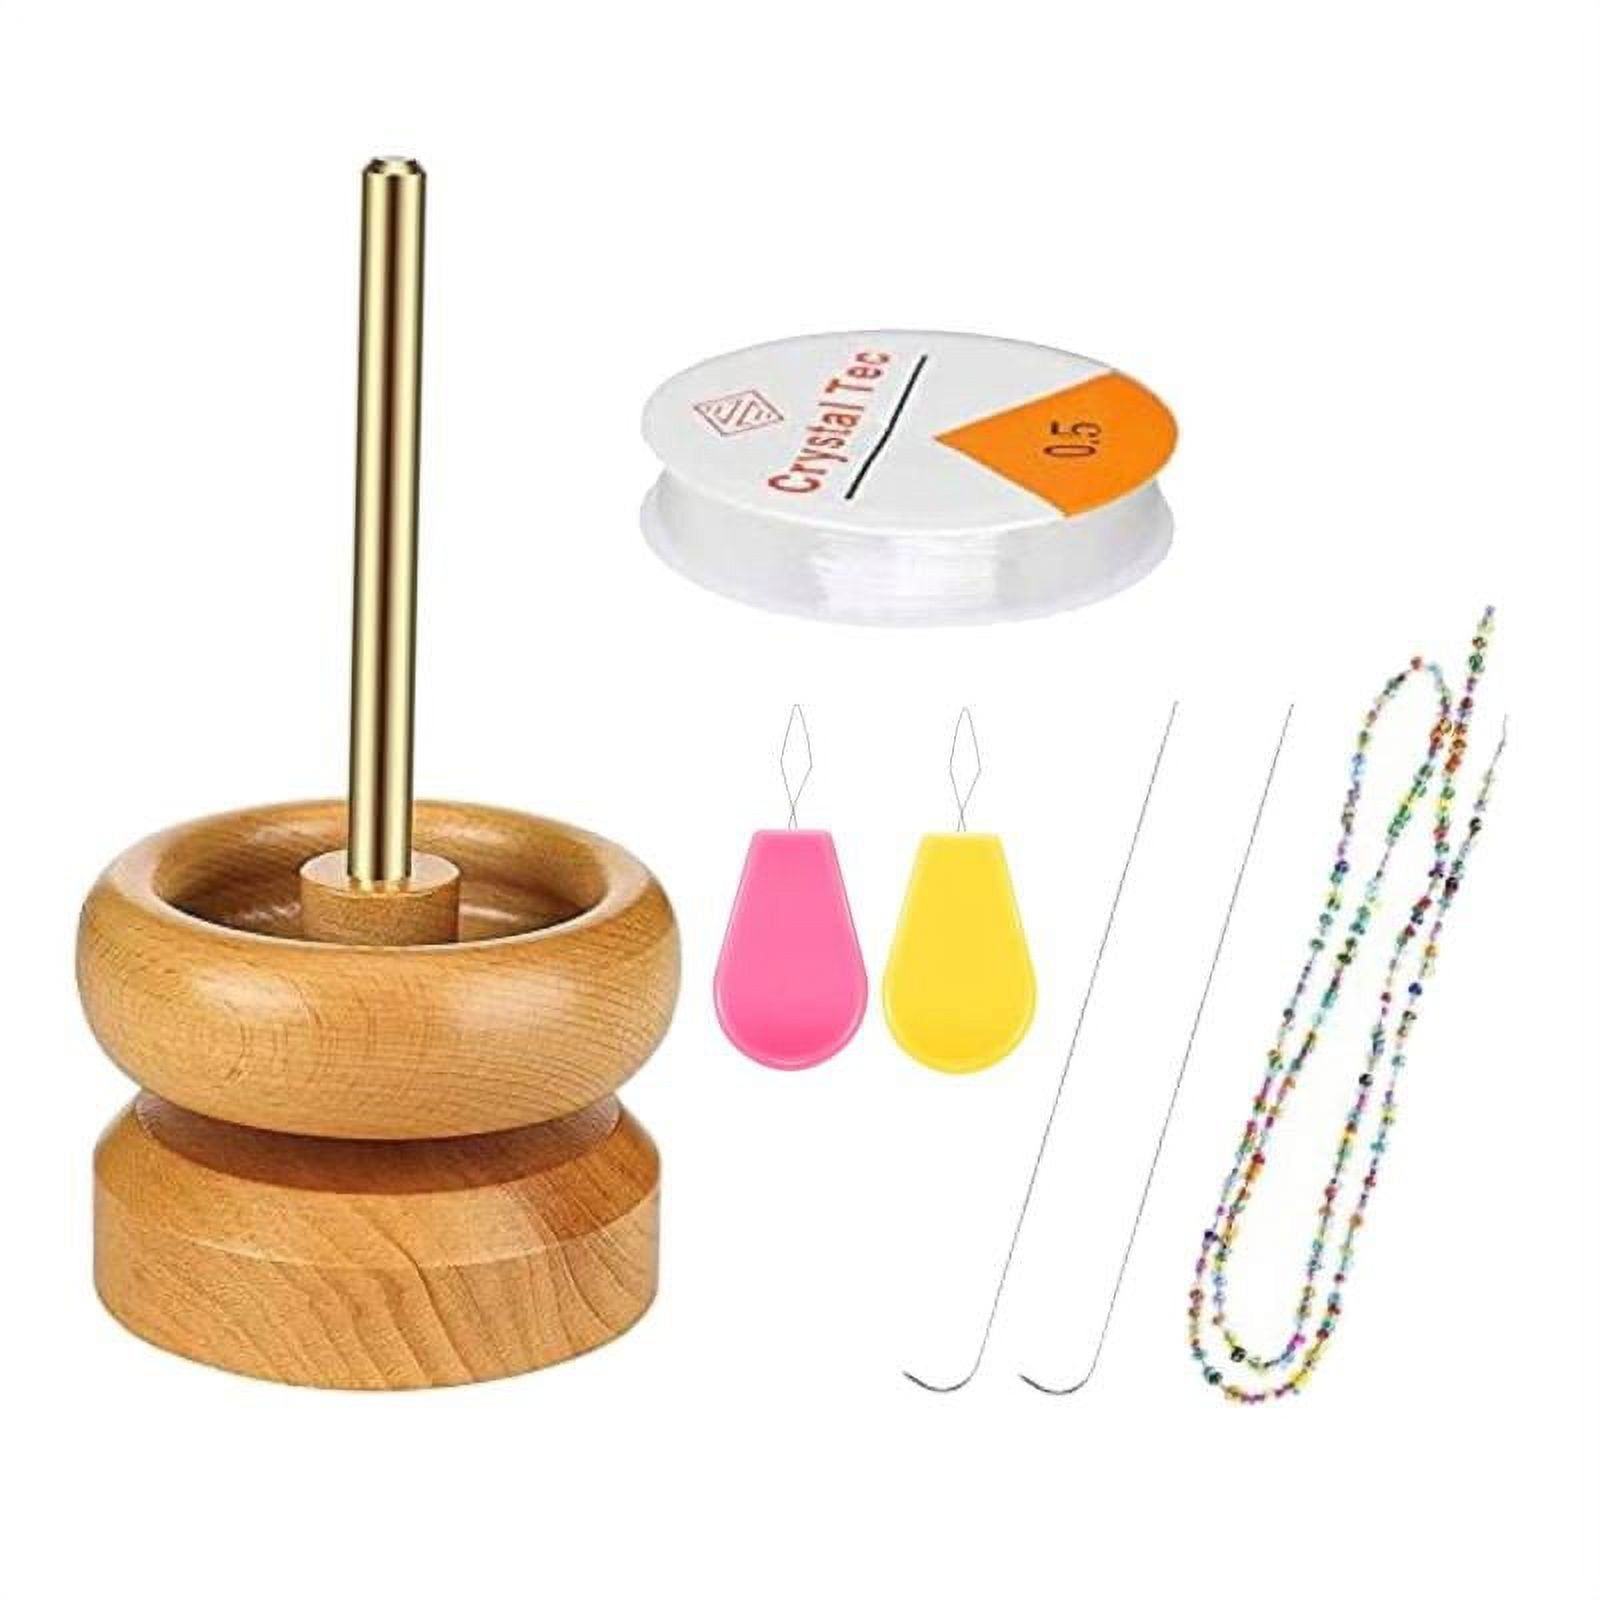 Buy Pine Wood Bead Spinner Decorated with Steel Needle at ShopLC.